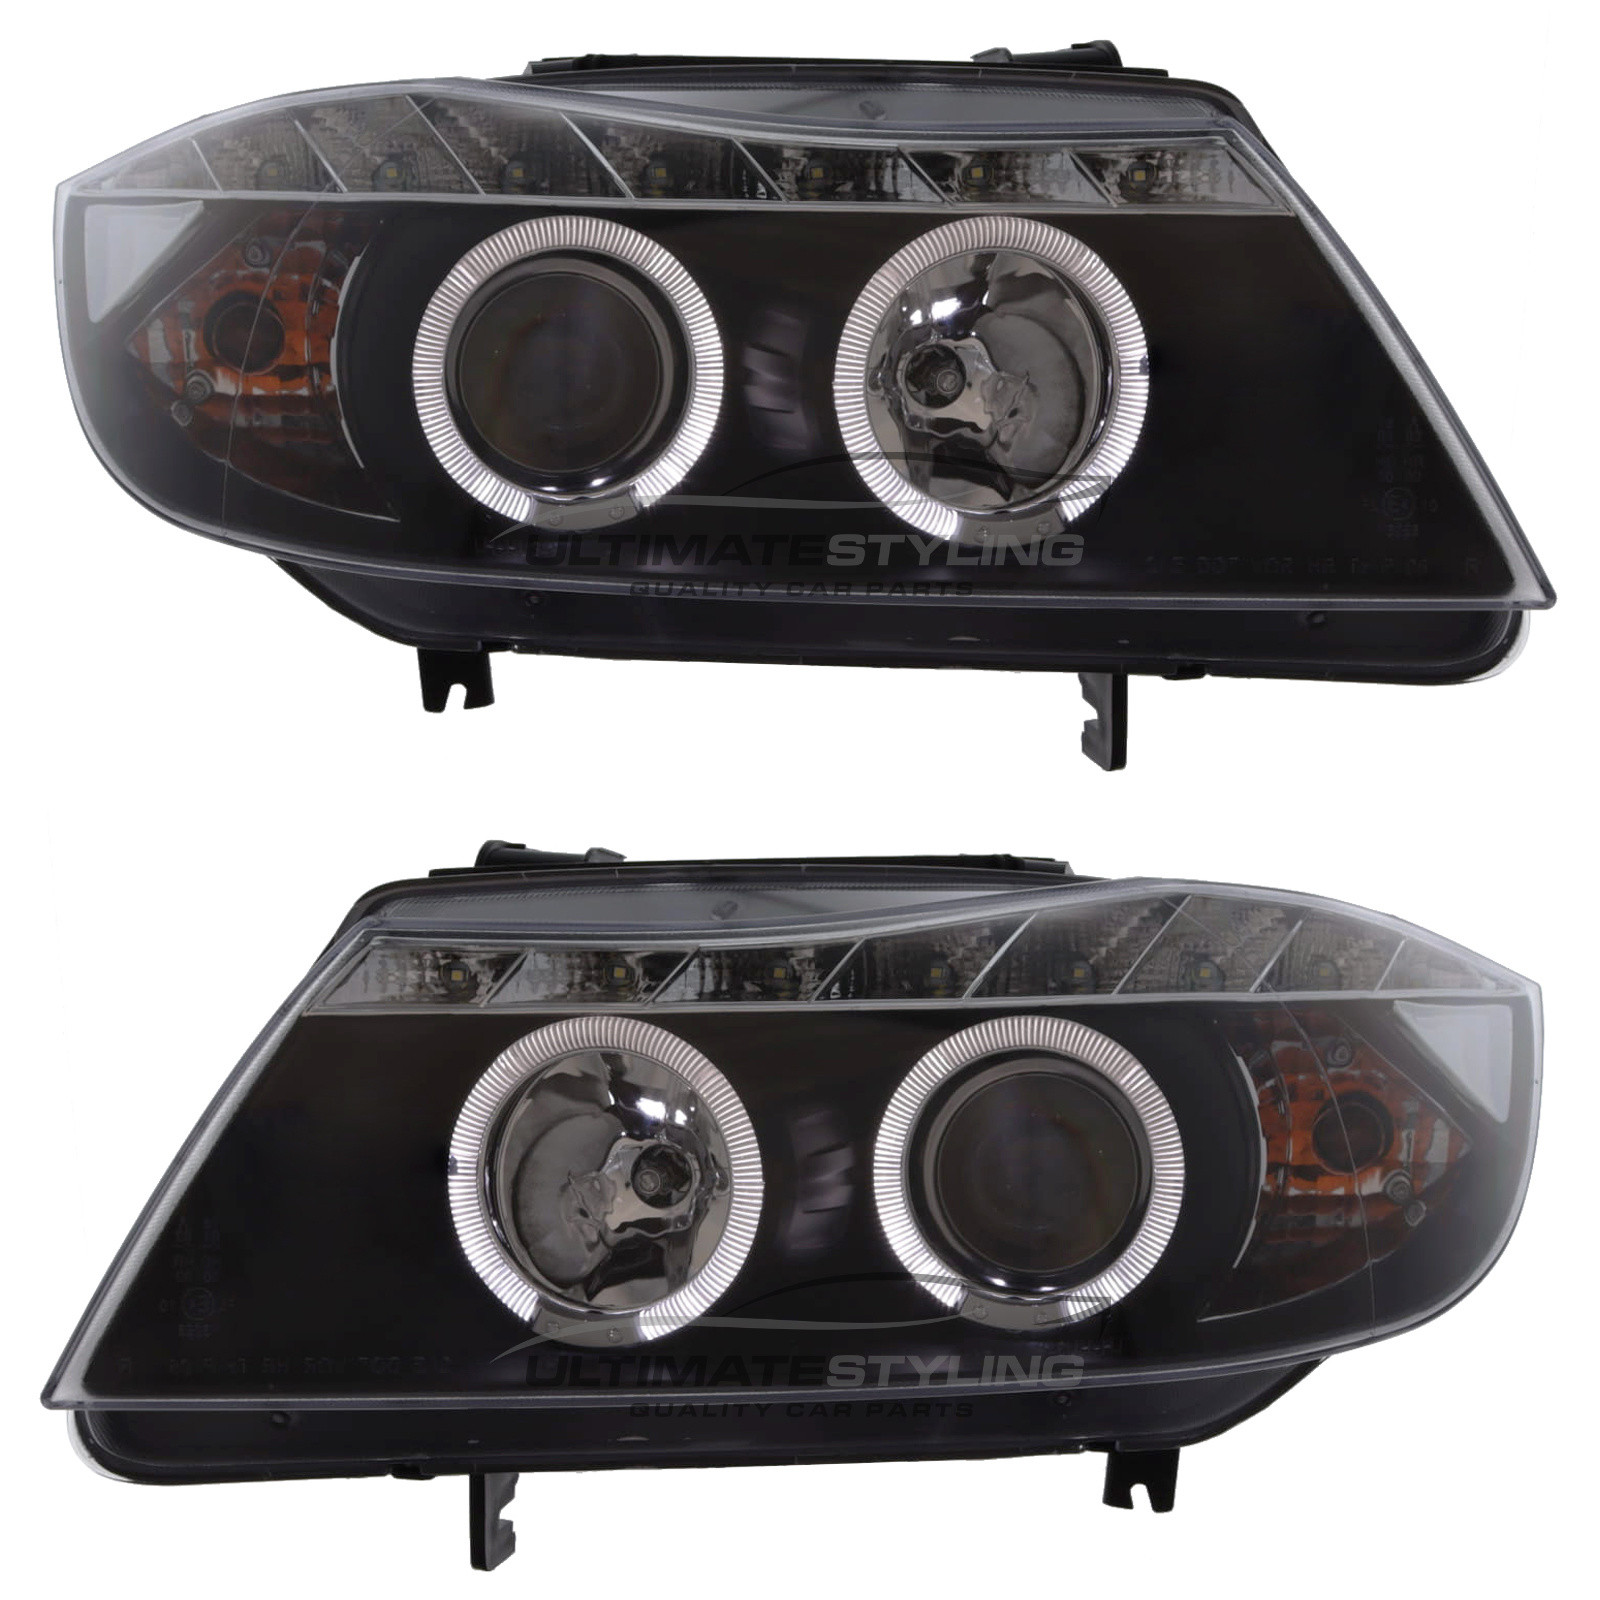 BMW 3 Series E90 & E91 2005-2008 Upgrade Headlights Black Inner LED Twin  Halo Angel Eyes with LED DRL Projector Xenon Look